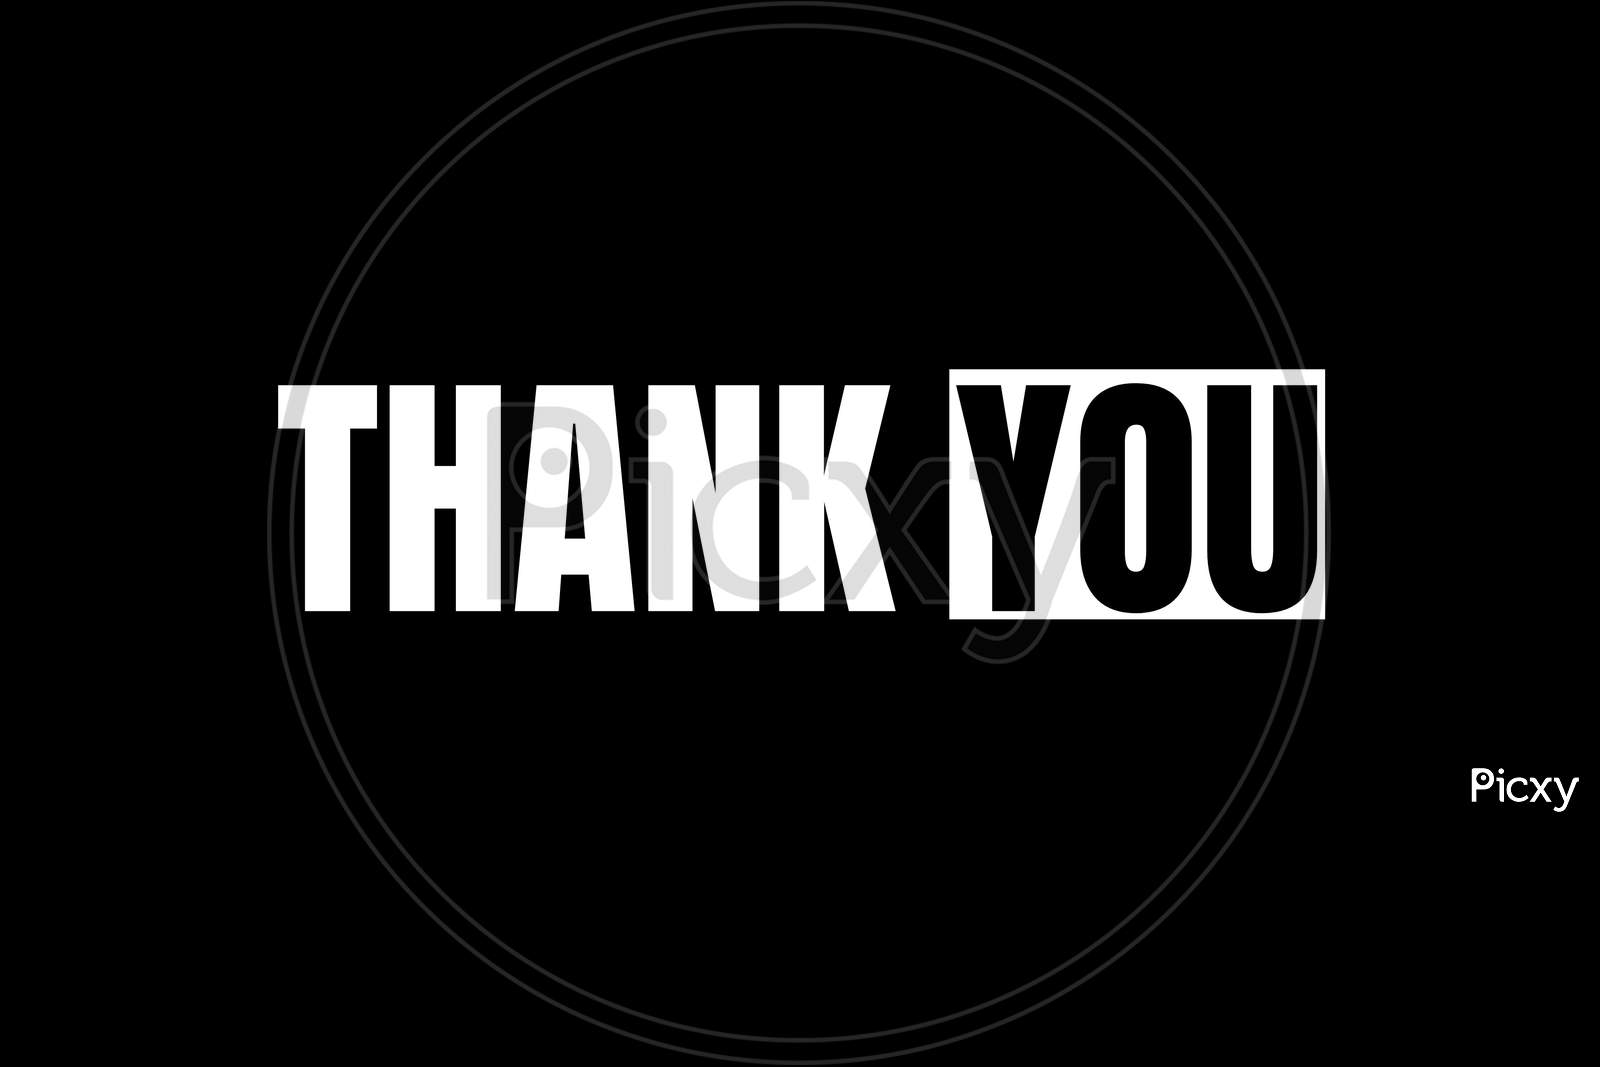 Thank you poster with modern design on black background